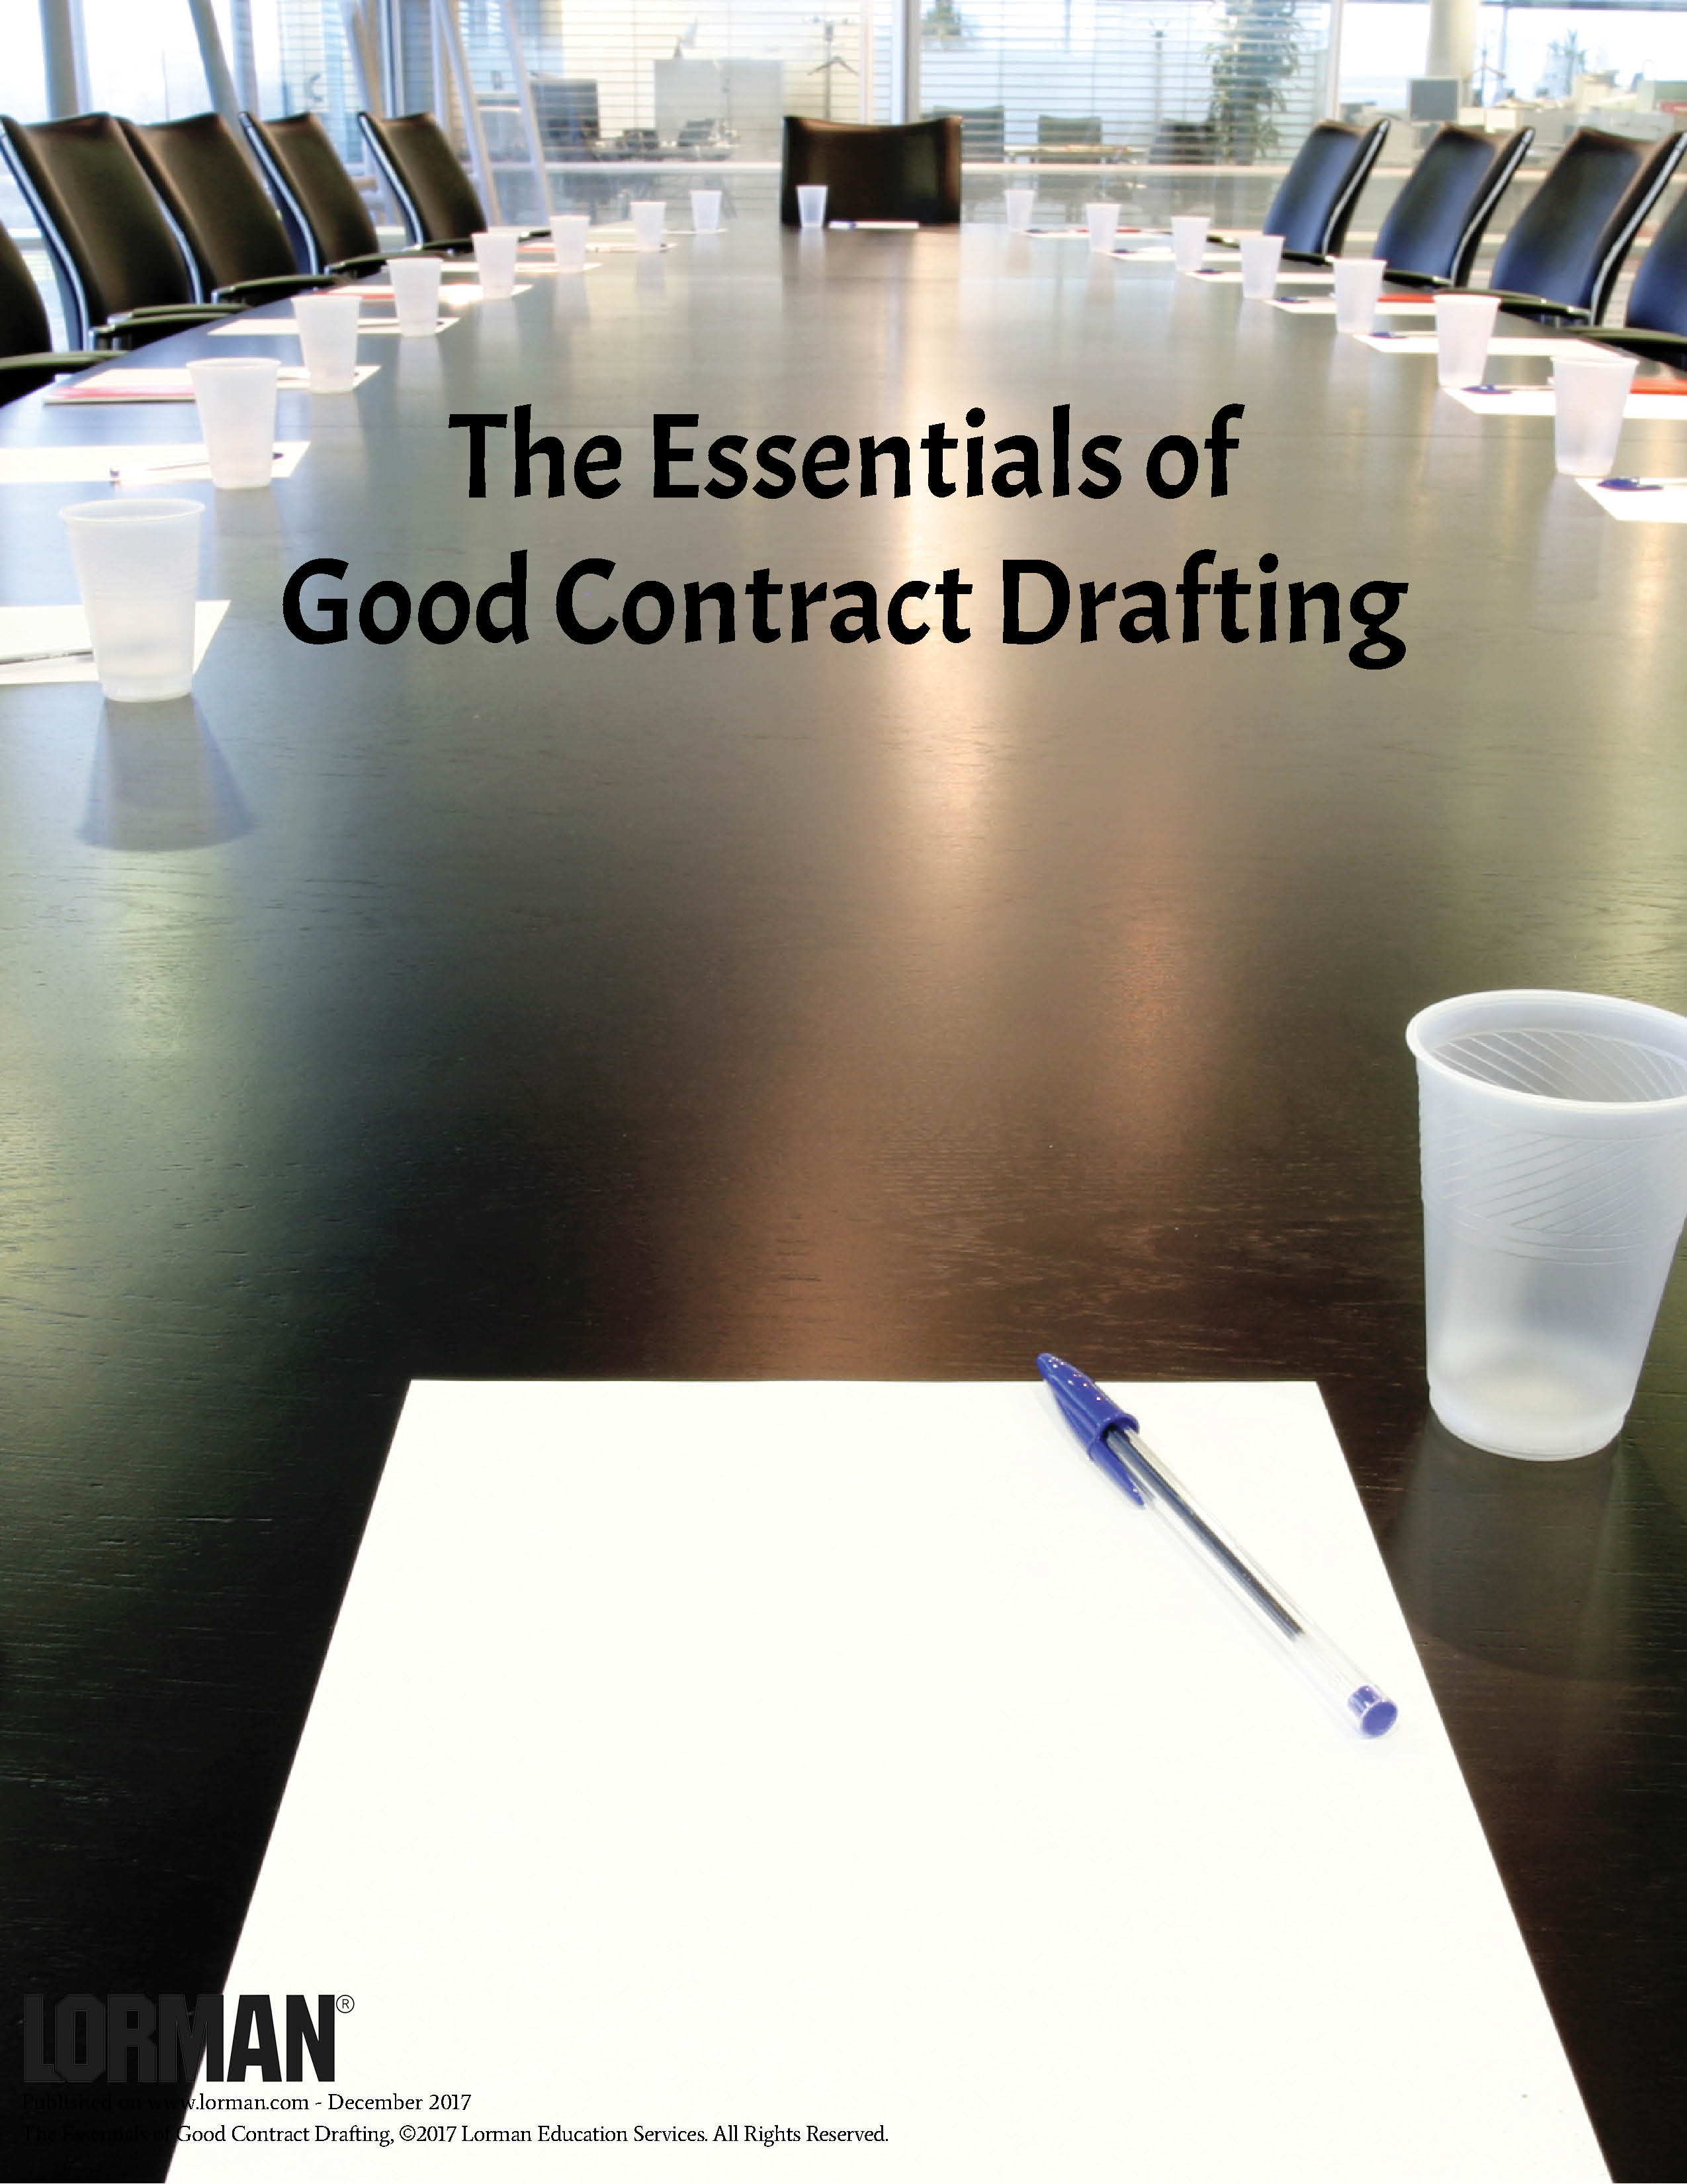 The Essentials of Good Contract Drafting